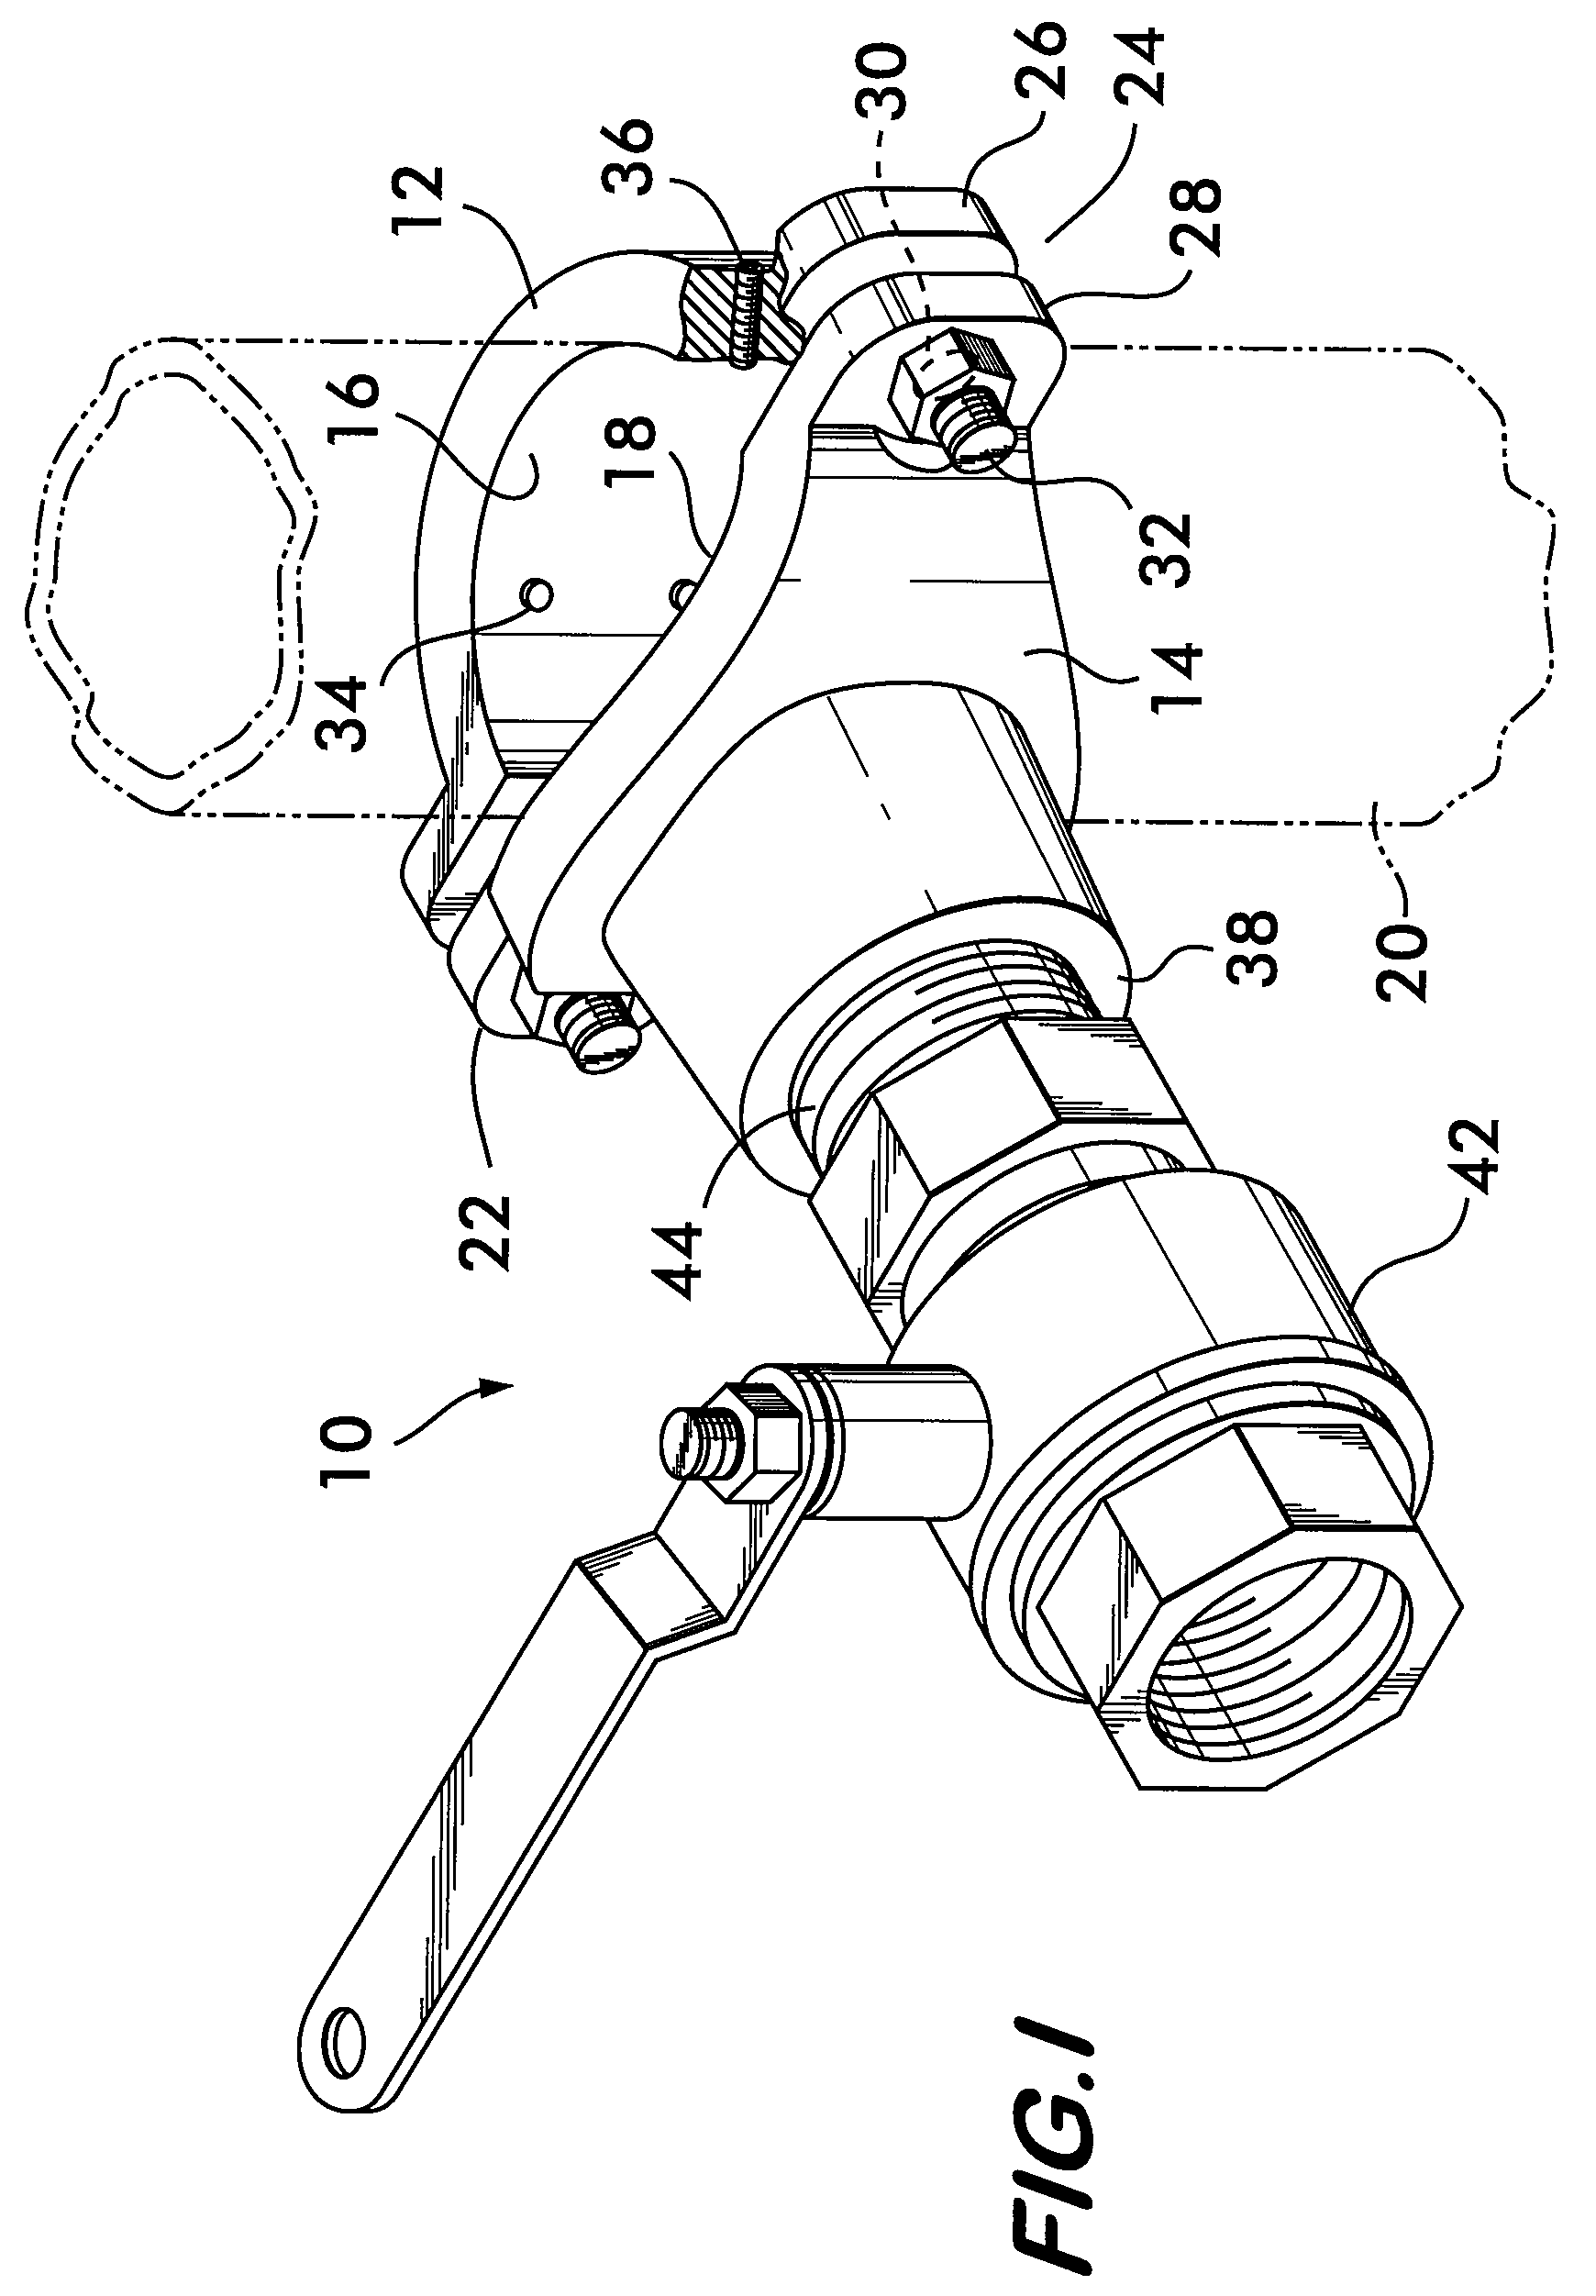 Hot tap device